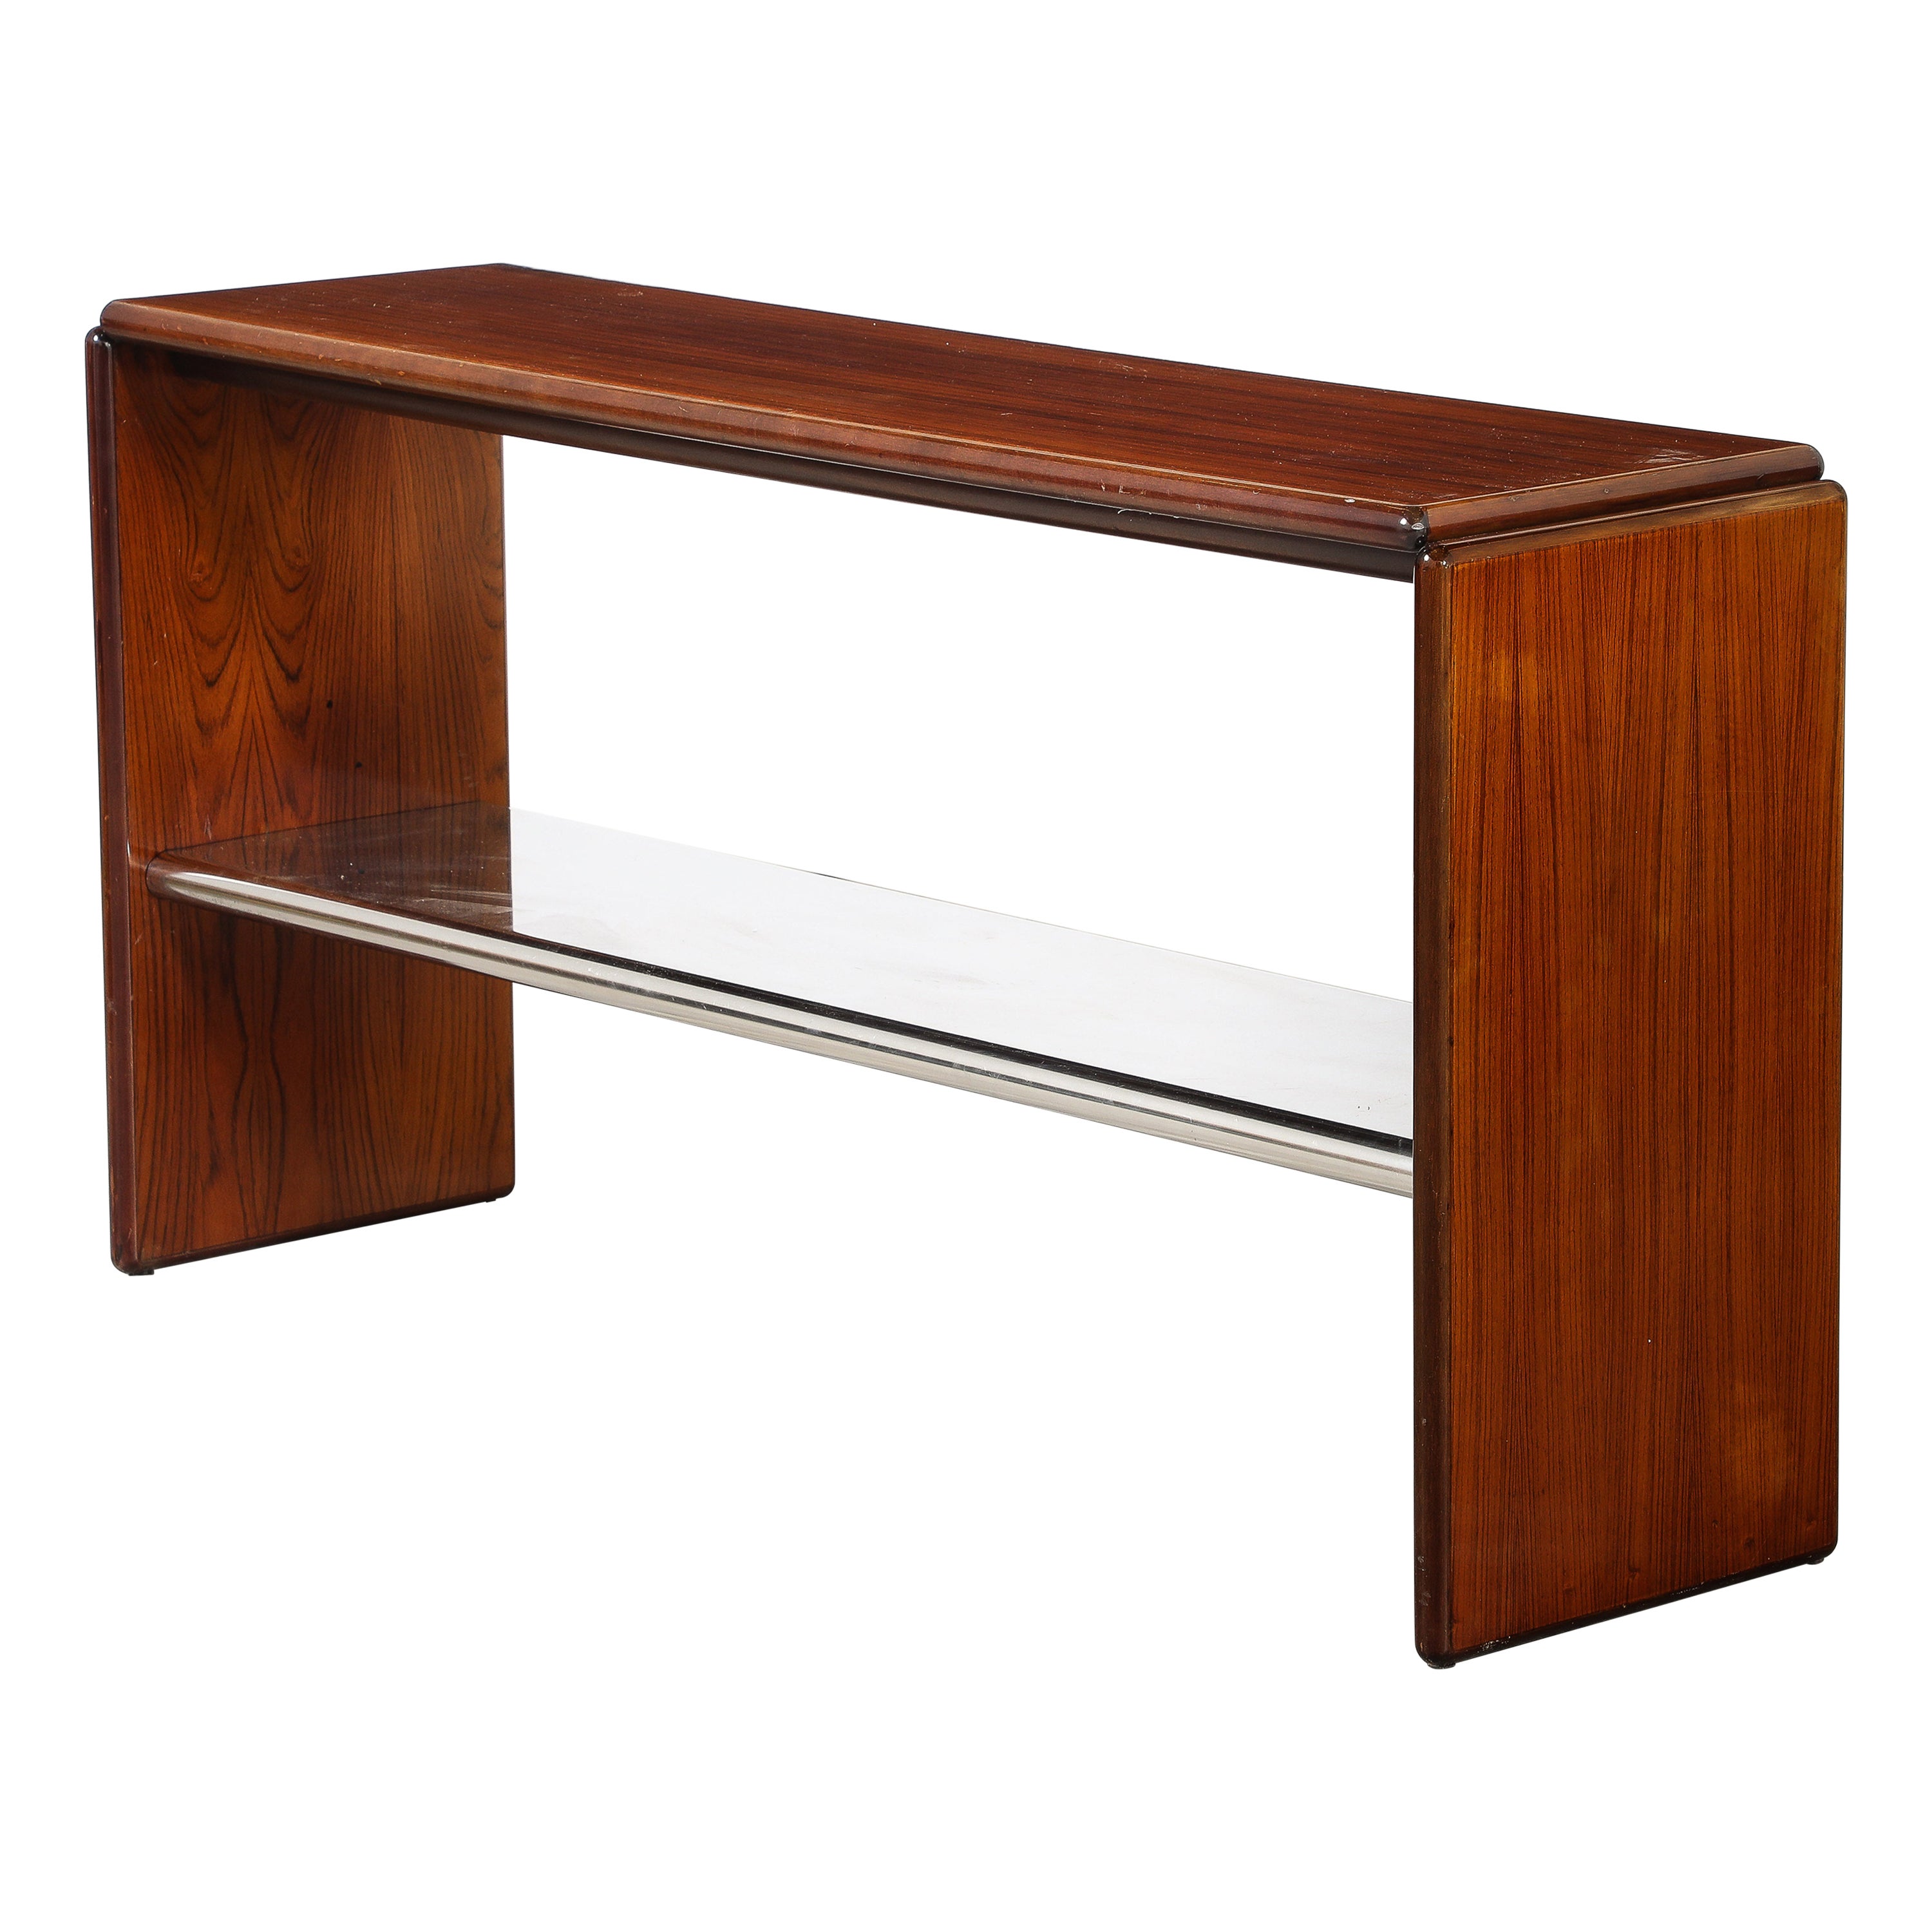 Italian Modernist Wood and Chrome Console Table, Italy, circa 1960 For Sale